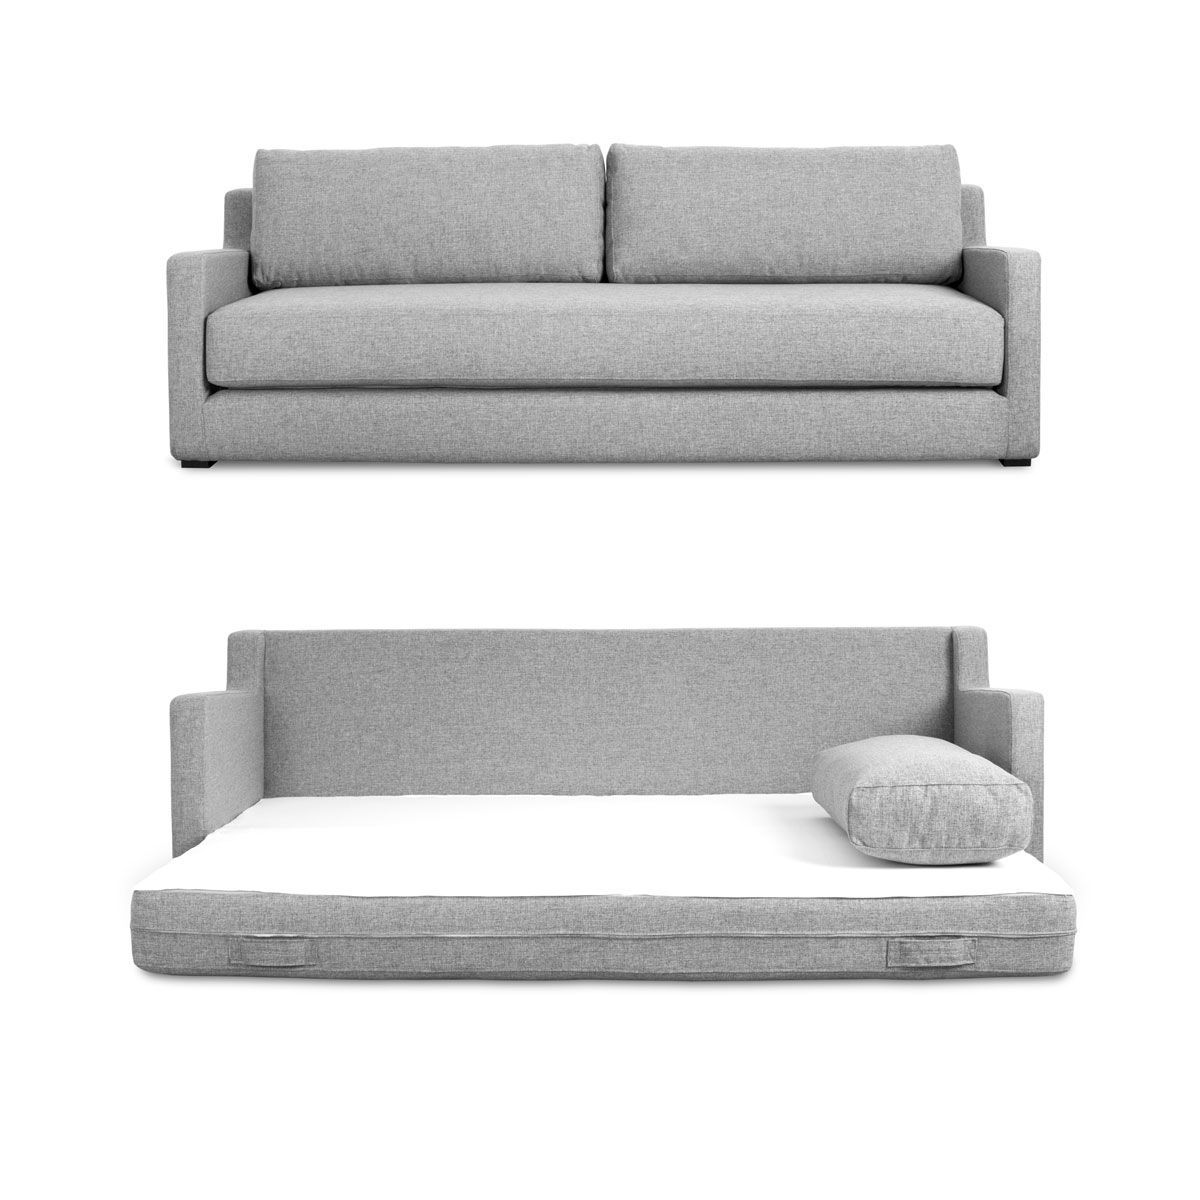 Newest Queen Size Convertible Sofa Bed – Ideas On Foter Inside Queen Size Convertible Sofa Beds (View 4 of 15)